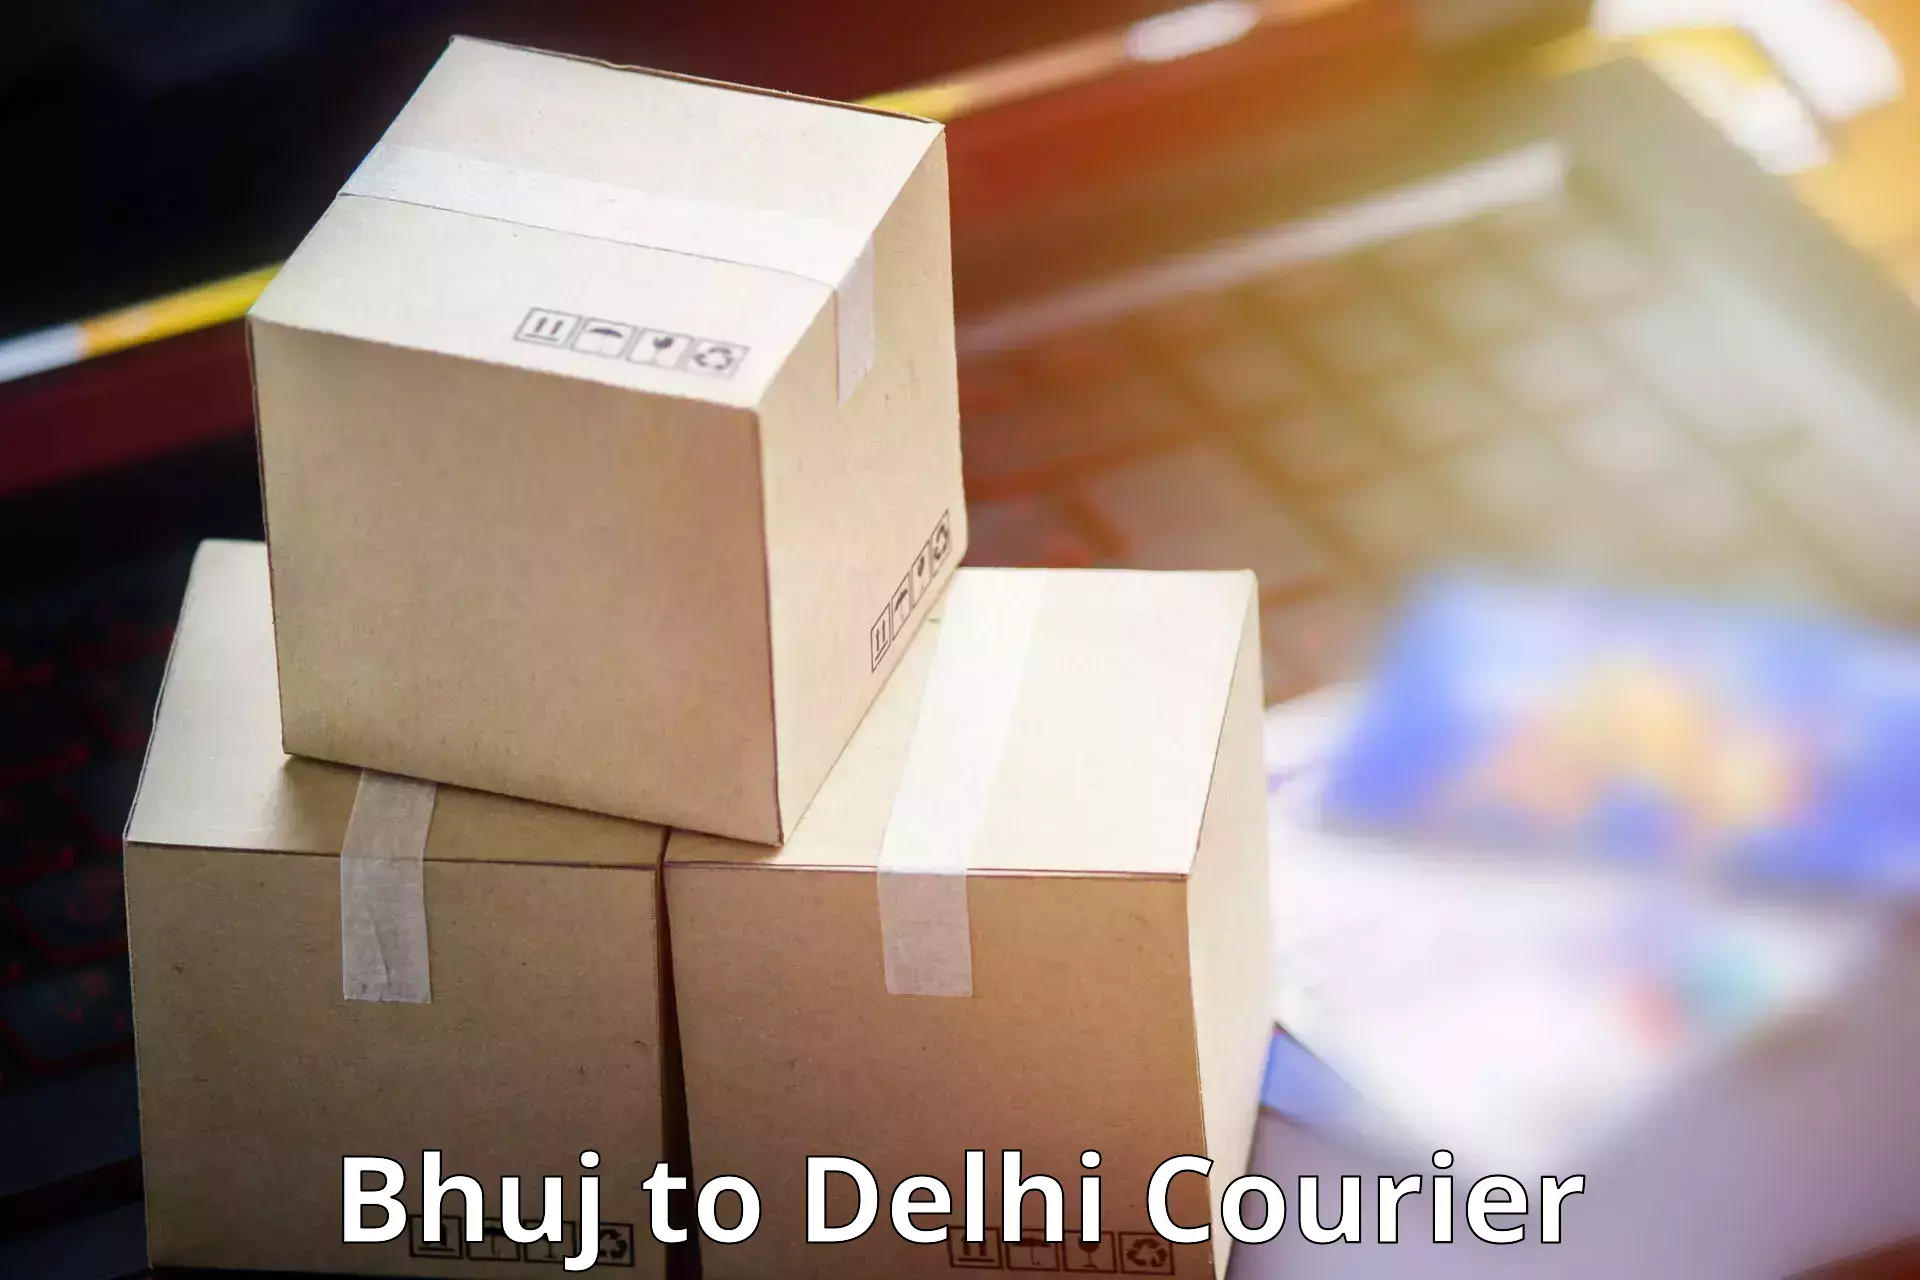 Speedy delivery service Bhuj to Lodhi Road